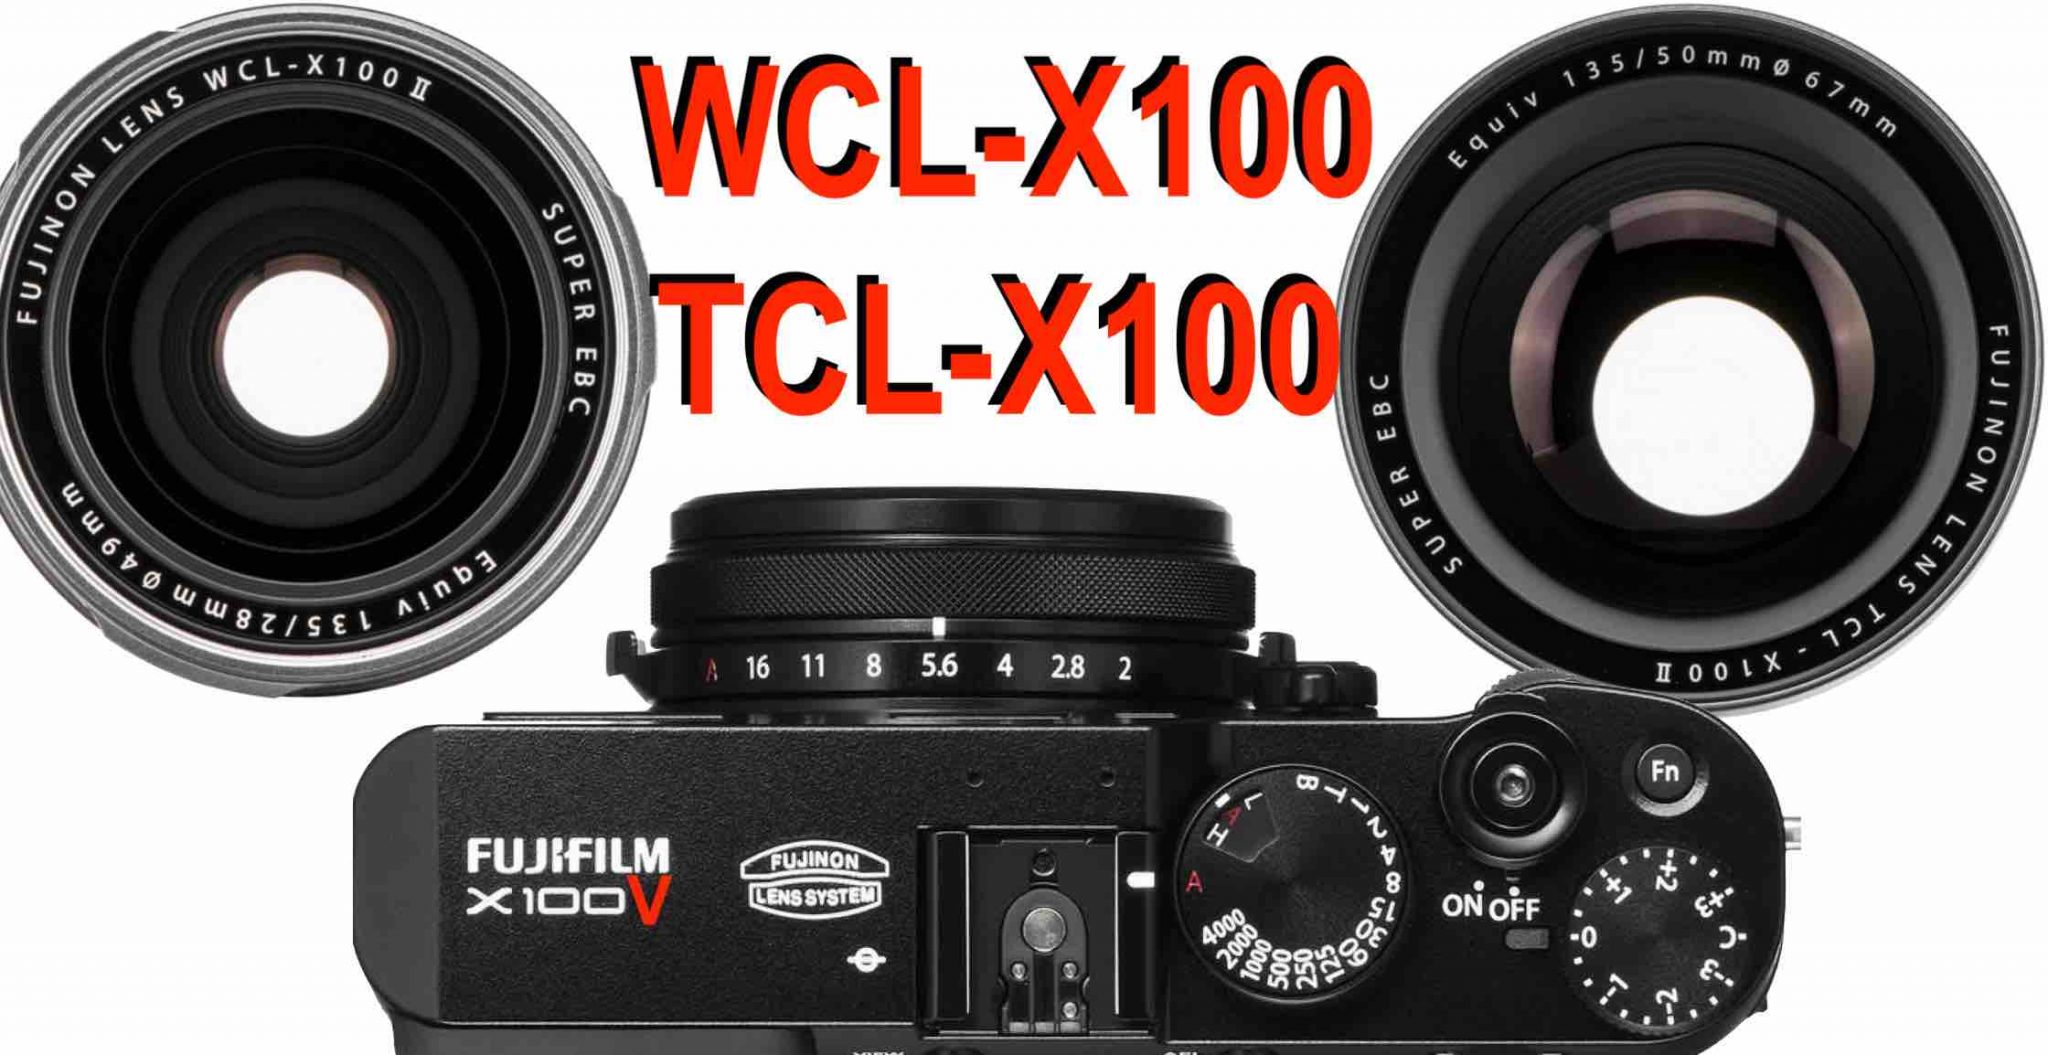 New Fujifilm X100V Lens still Compatible with current WCL/TCL-X100